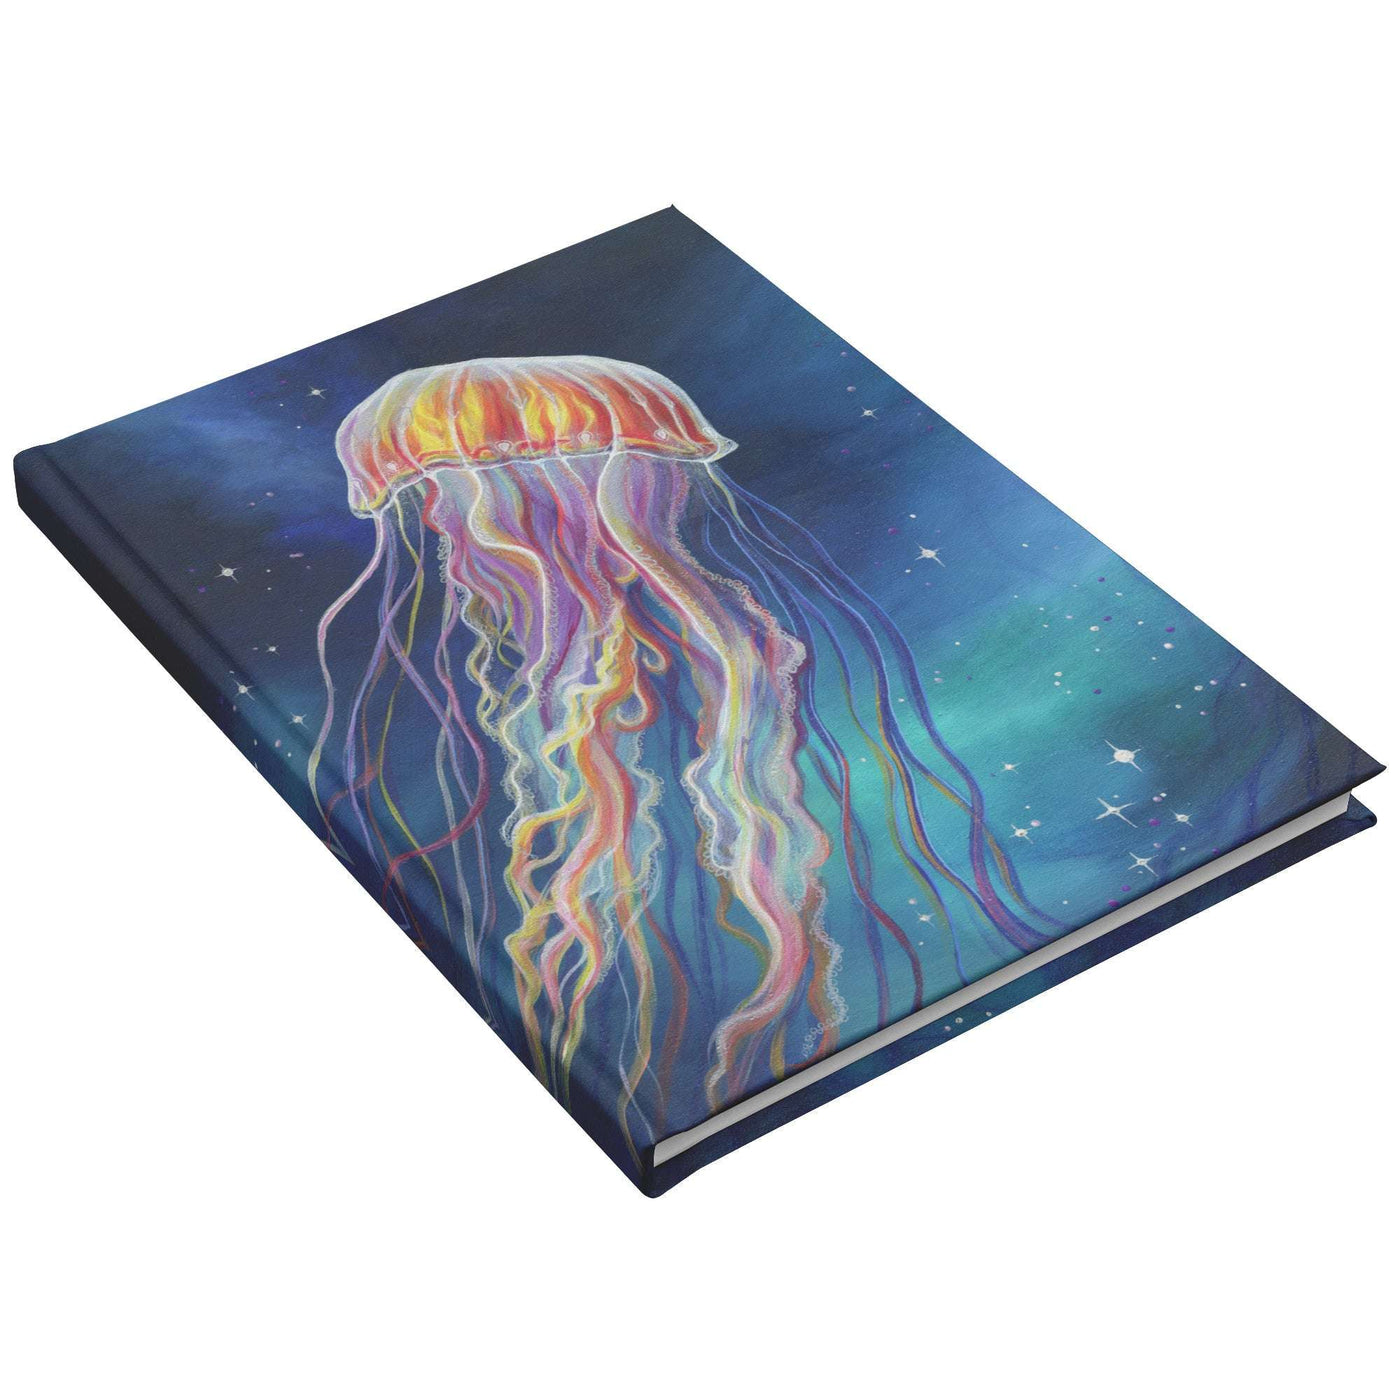 A hardcover Jellyfish Journal with an illustrated cover featuring a colorful jellyfish against a starry background.